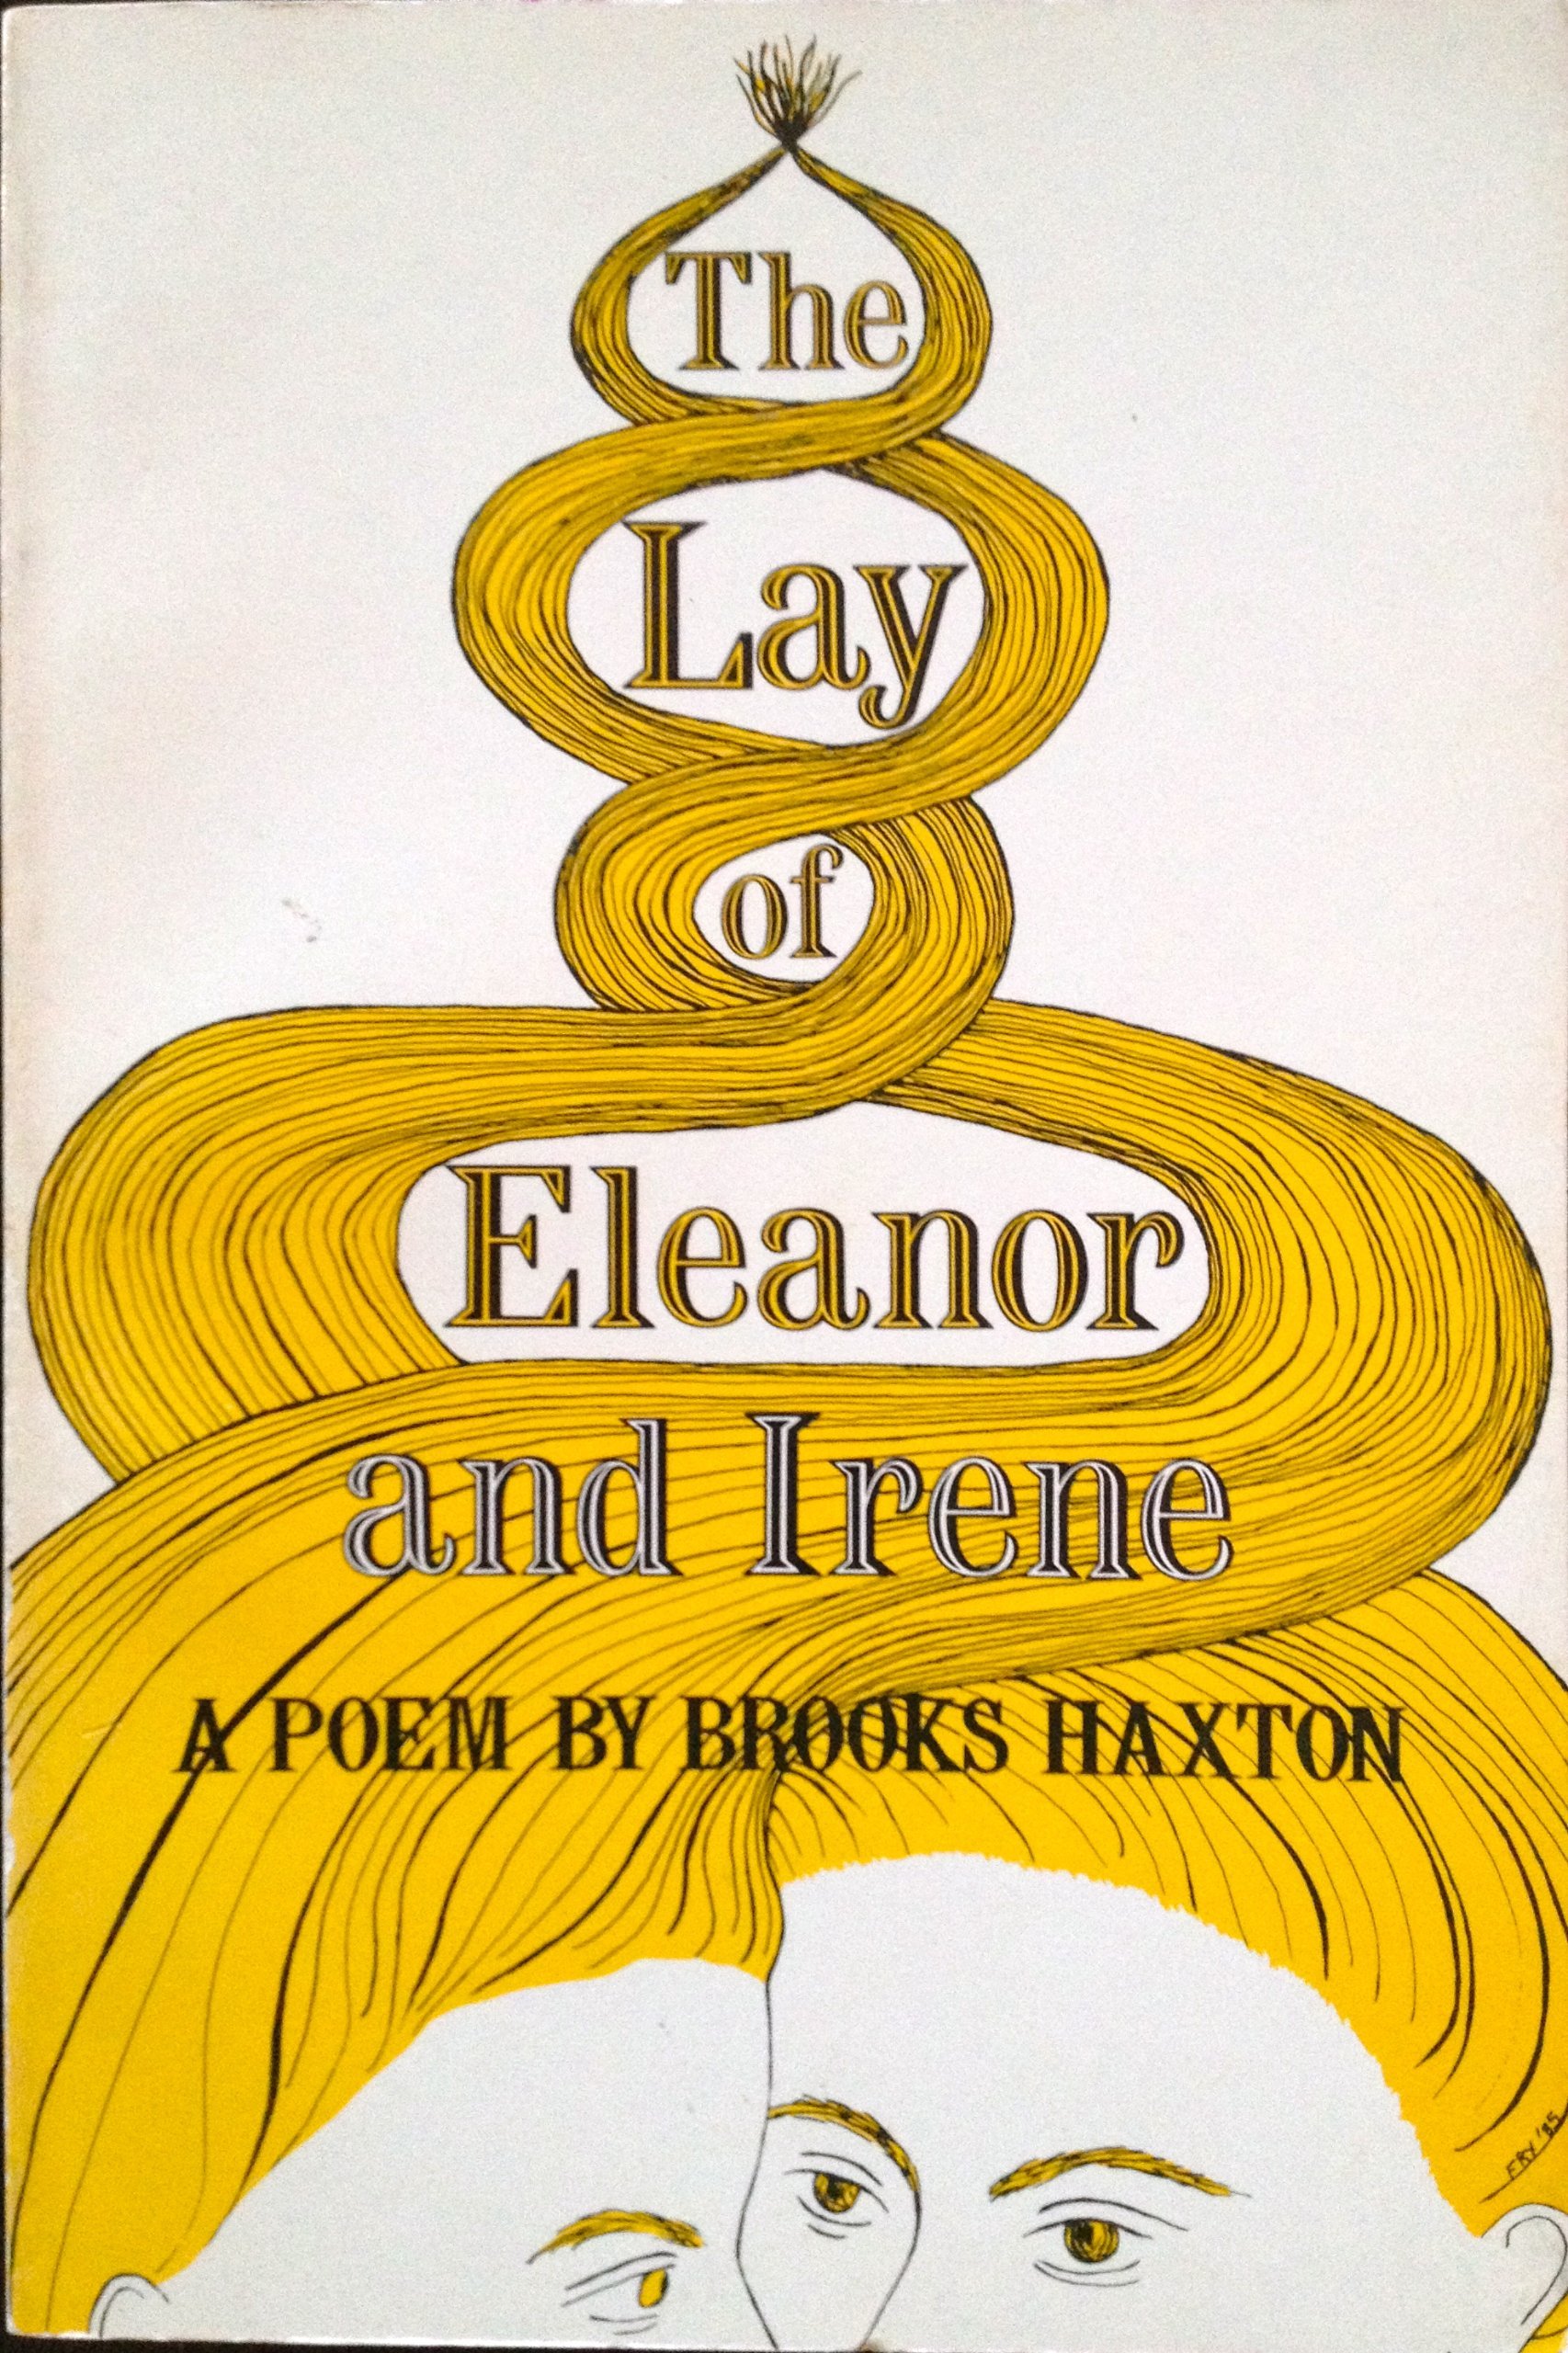 The Lay of Eleanor and Irene